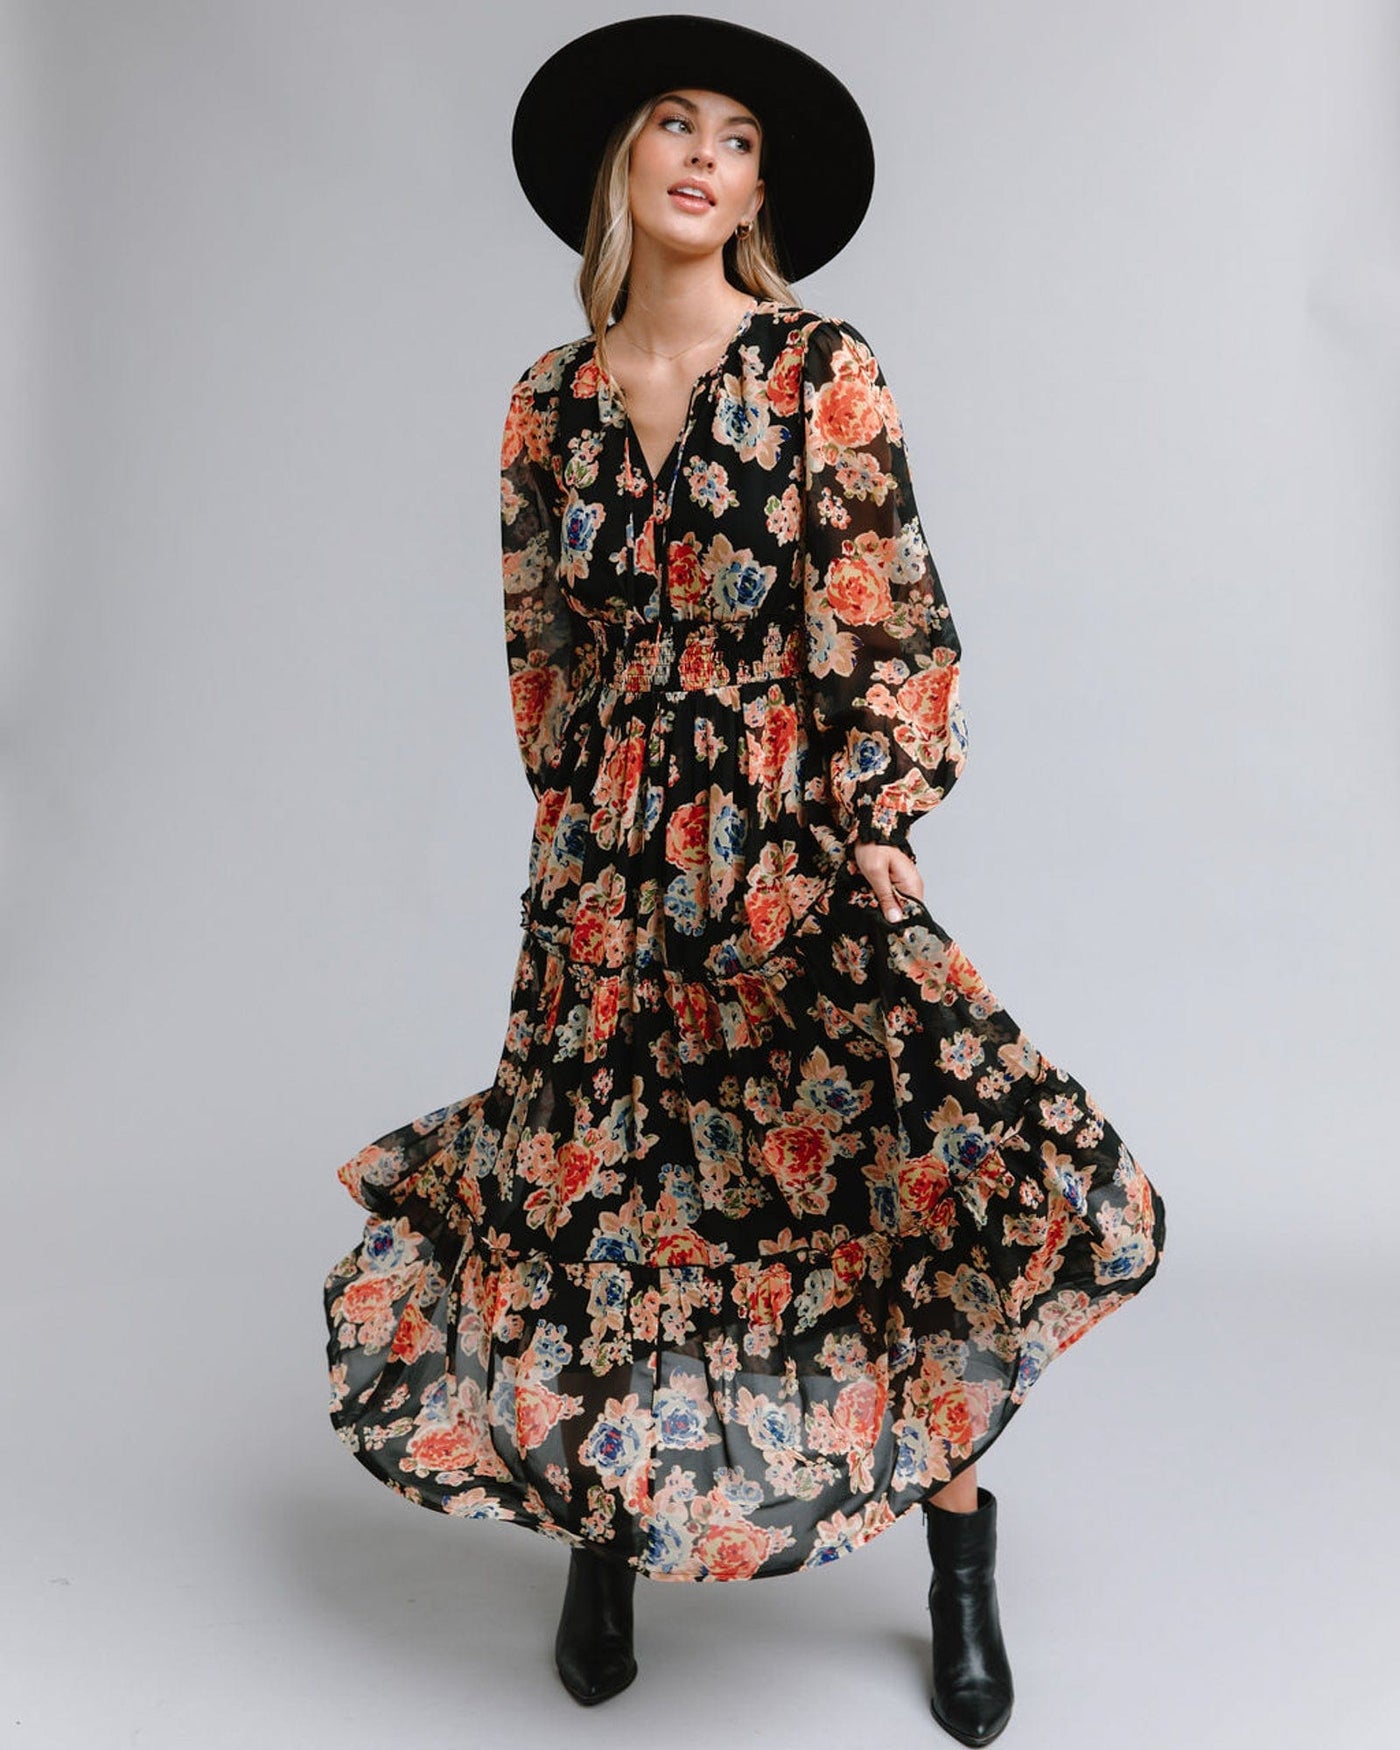 Dresses | Downeast Women's Clothing & Accessories | – Page 2